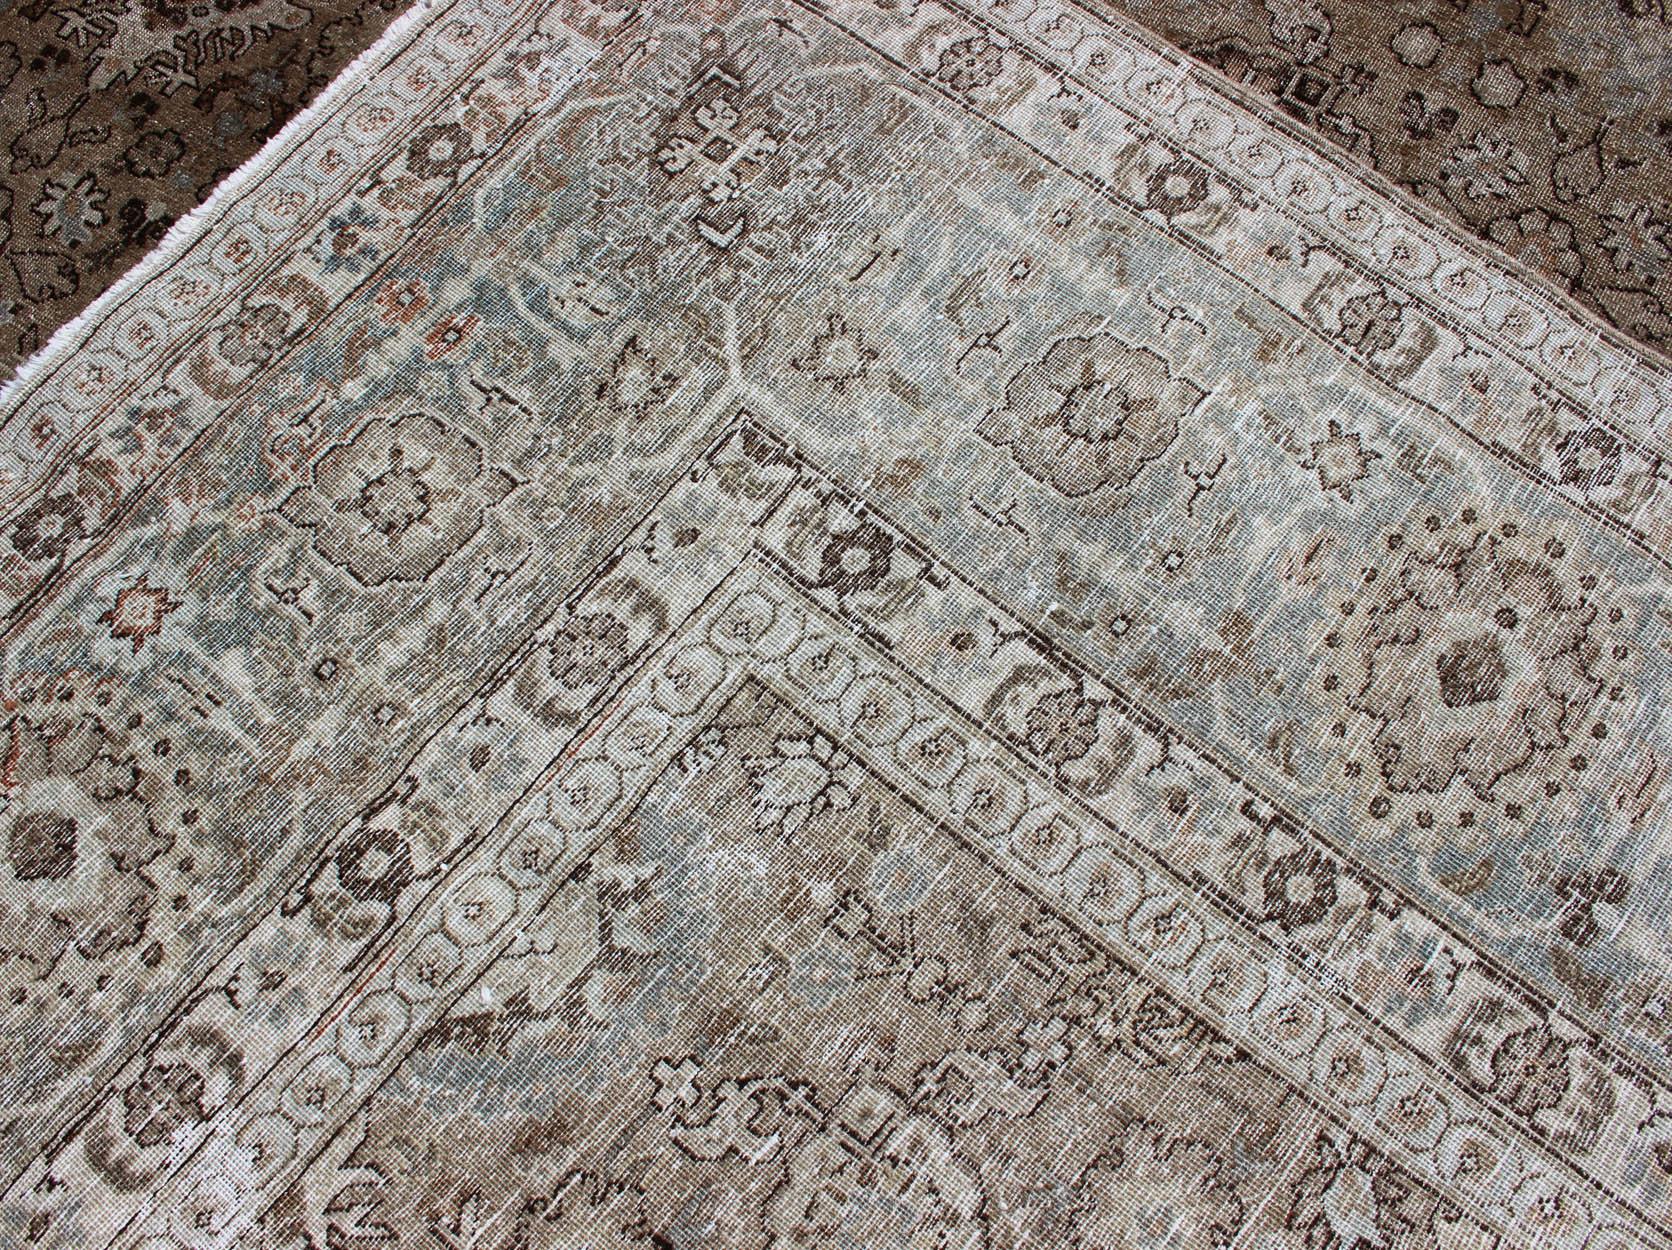 Antique Persian Tabriz Rug in Mocha, Camel, Brown, Gray and Light Blue For Sale 6